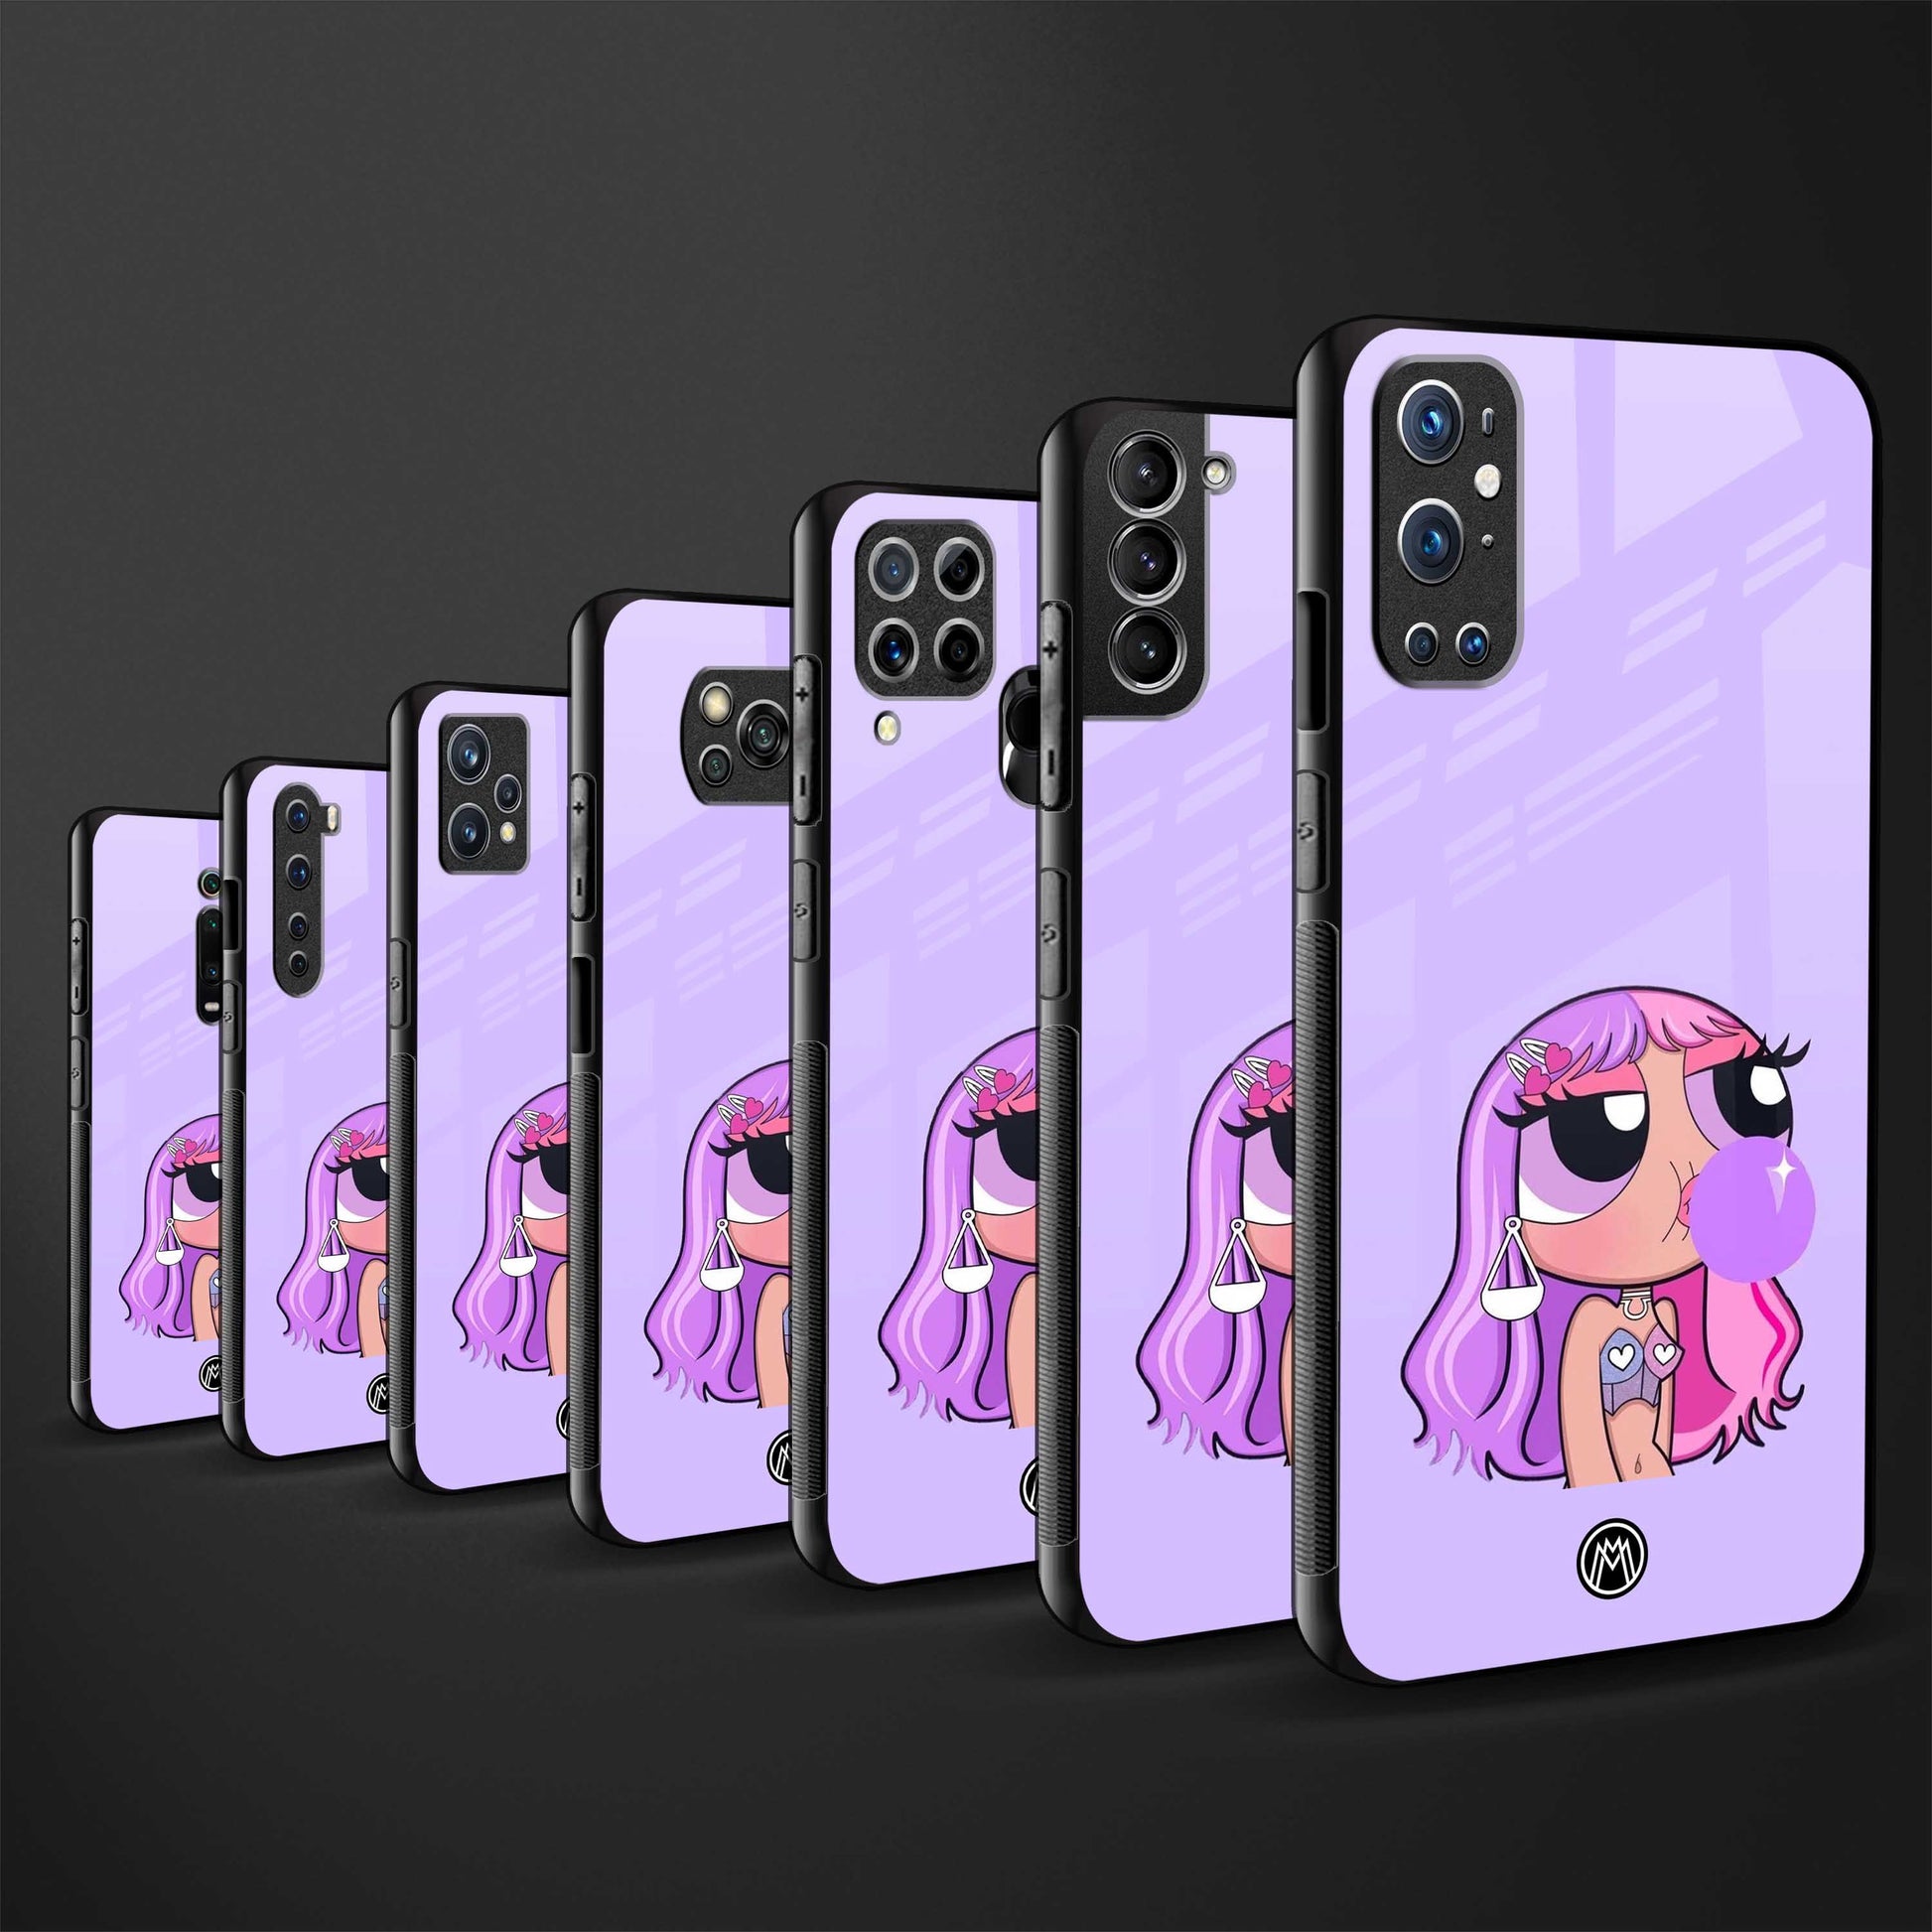 purple chic powerpuff girls glass case for phone case | glass case for samsung galaxy s23 ultra